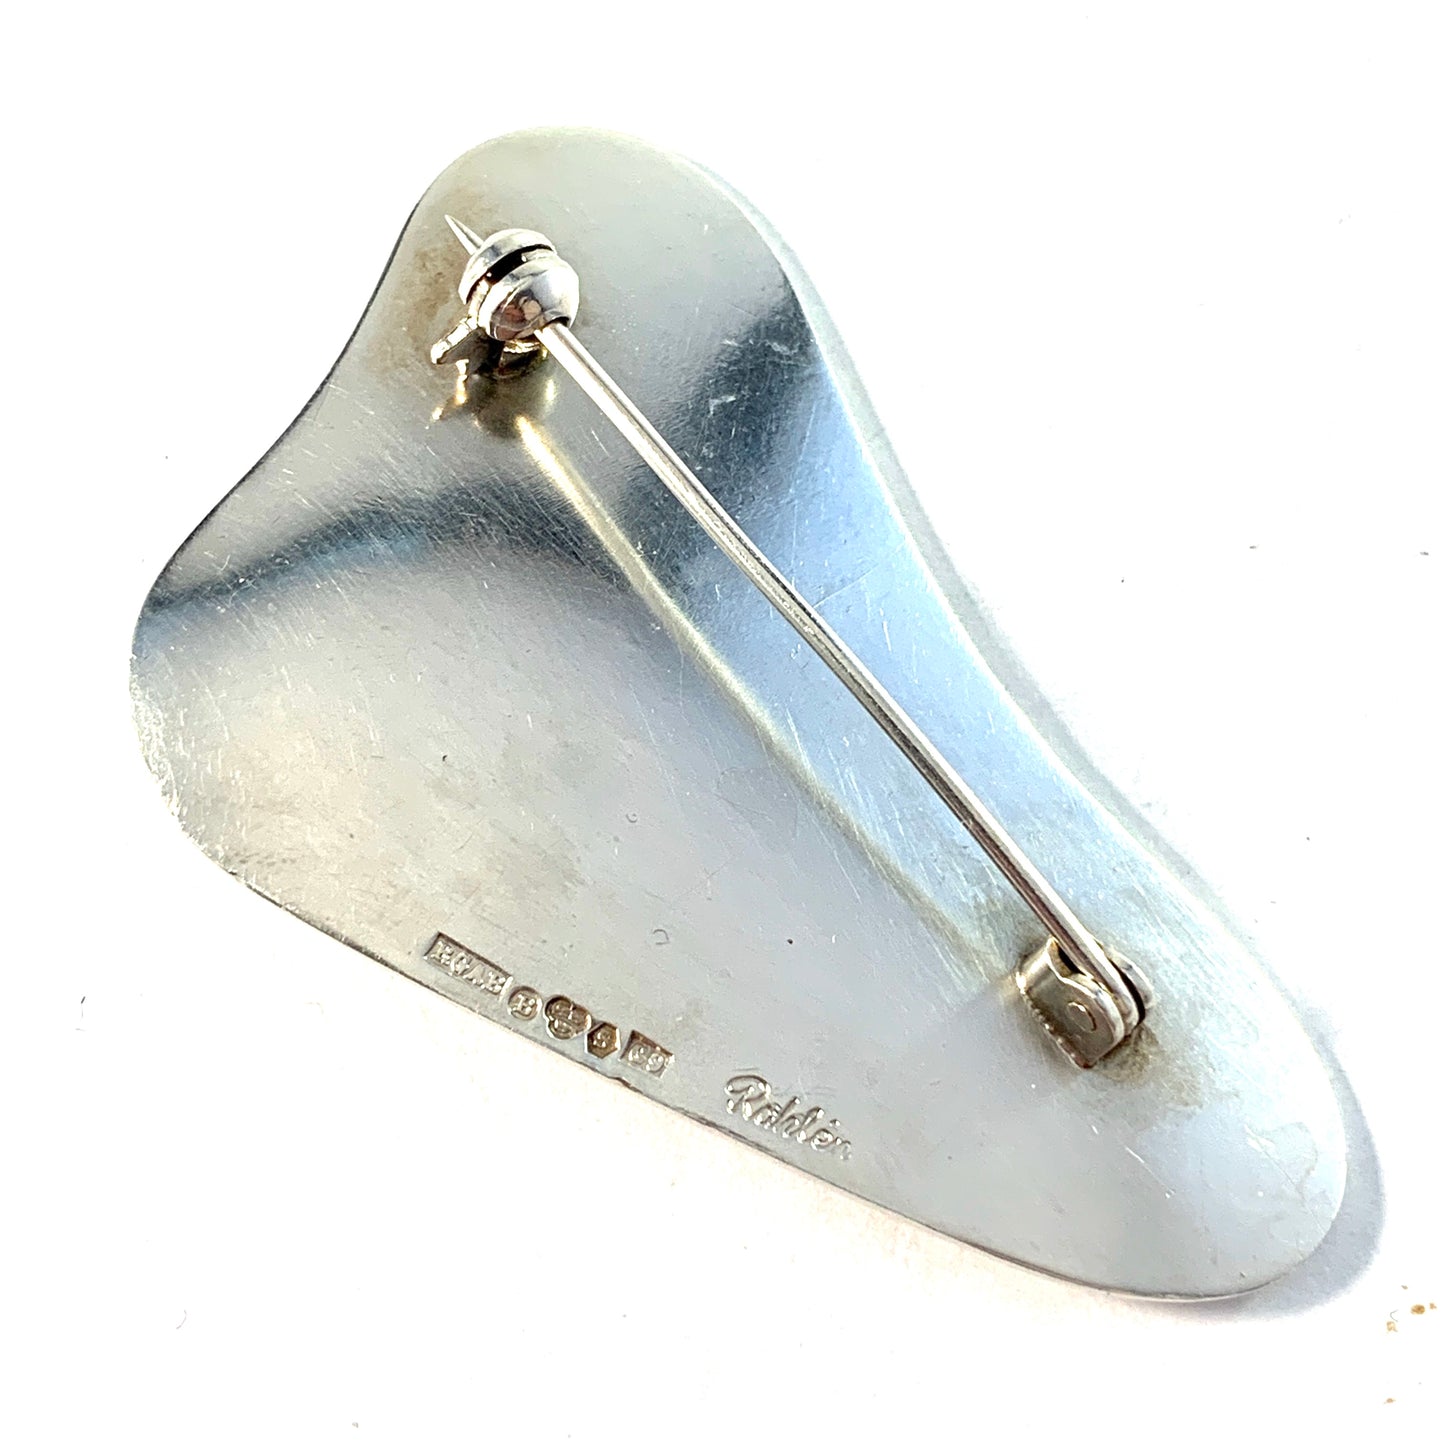 Rahlen, Sweden 1957. Mid Century Modern Sterling Silver Chalcedony Brooch. Signed.